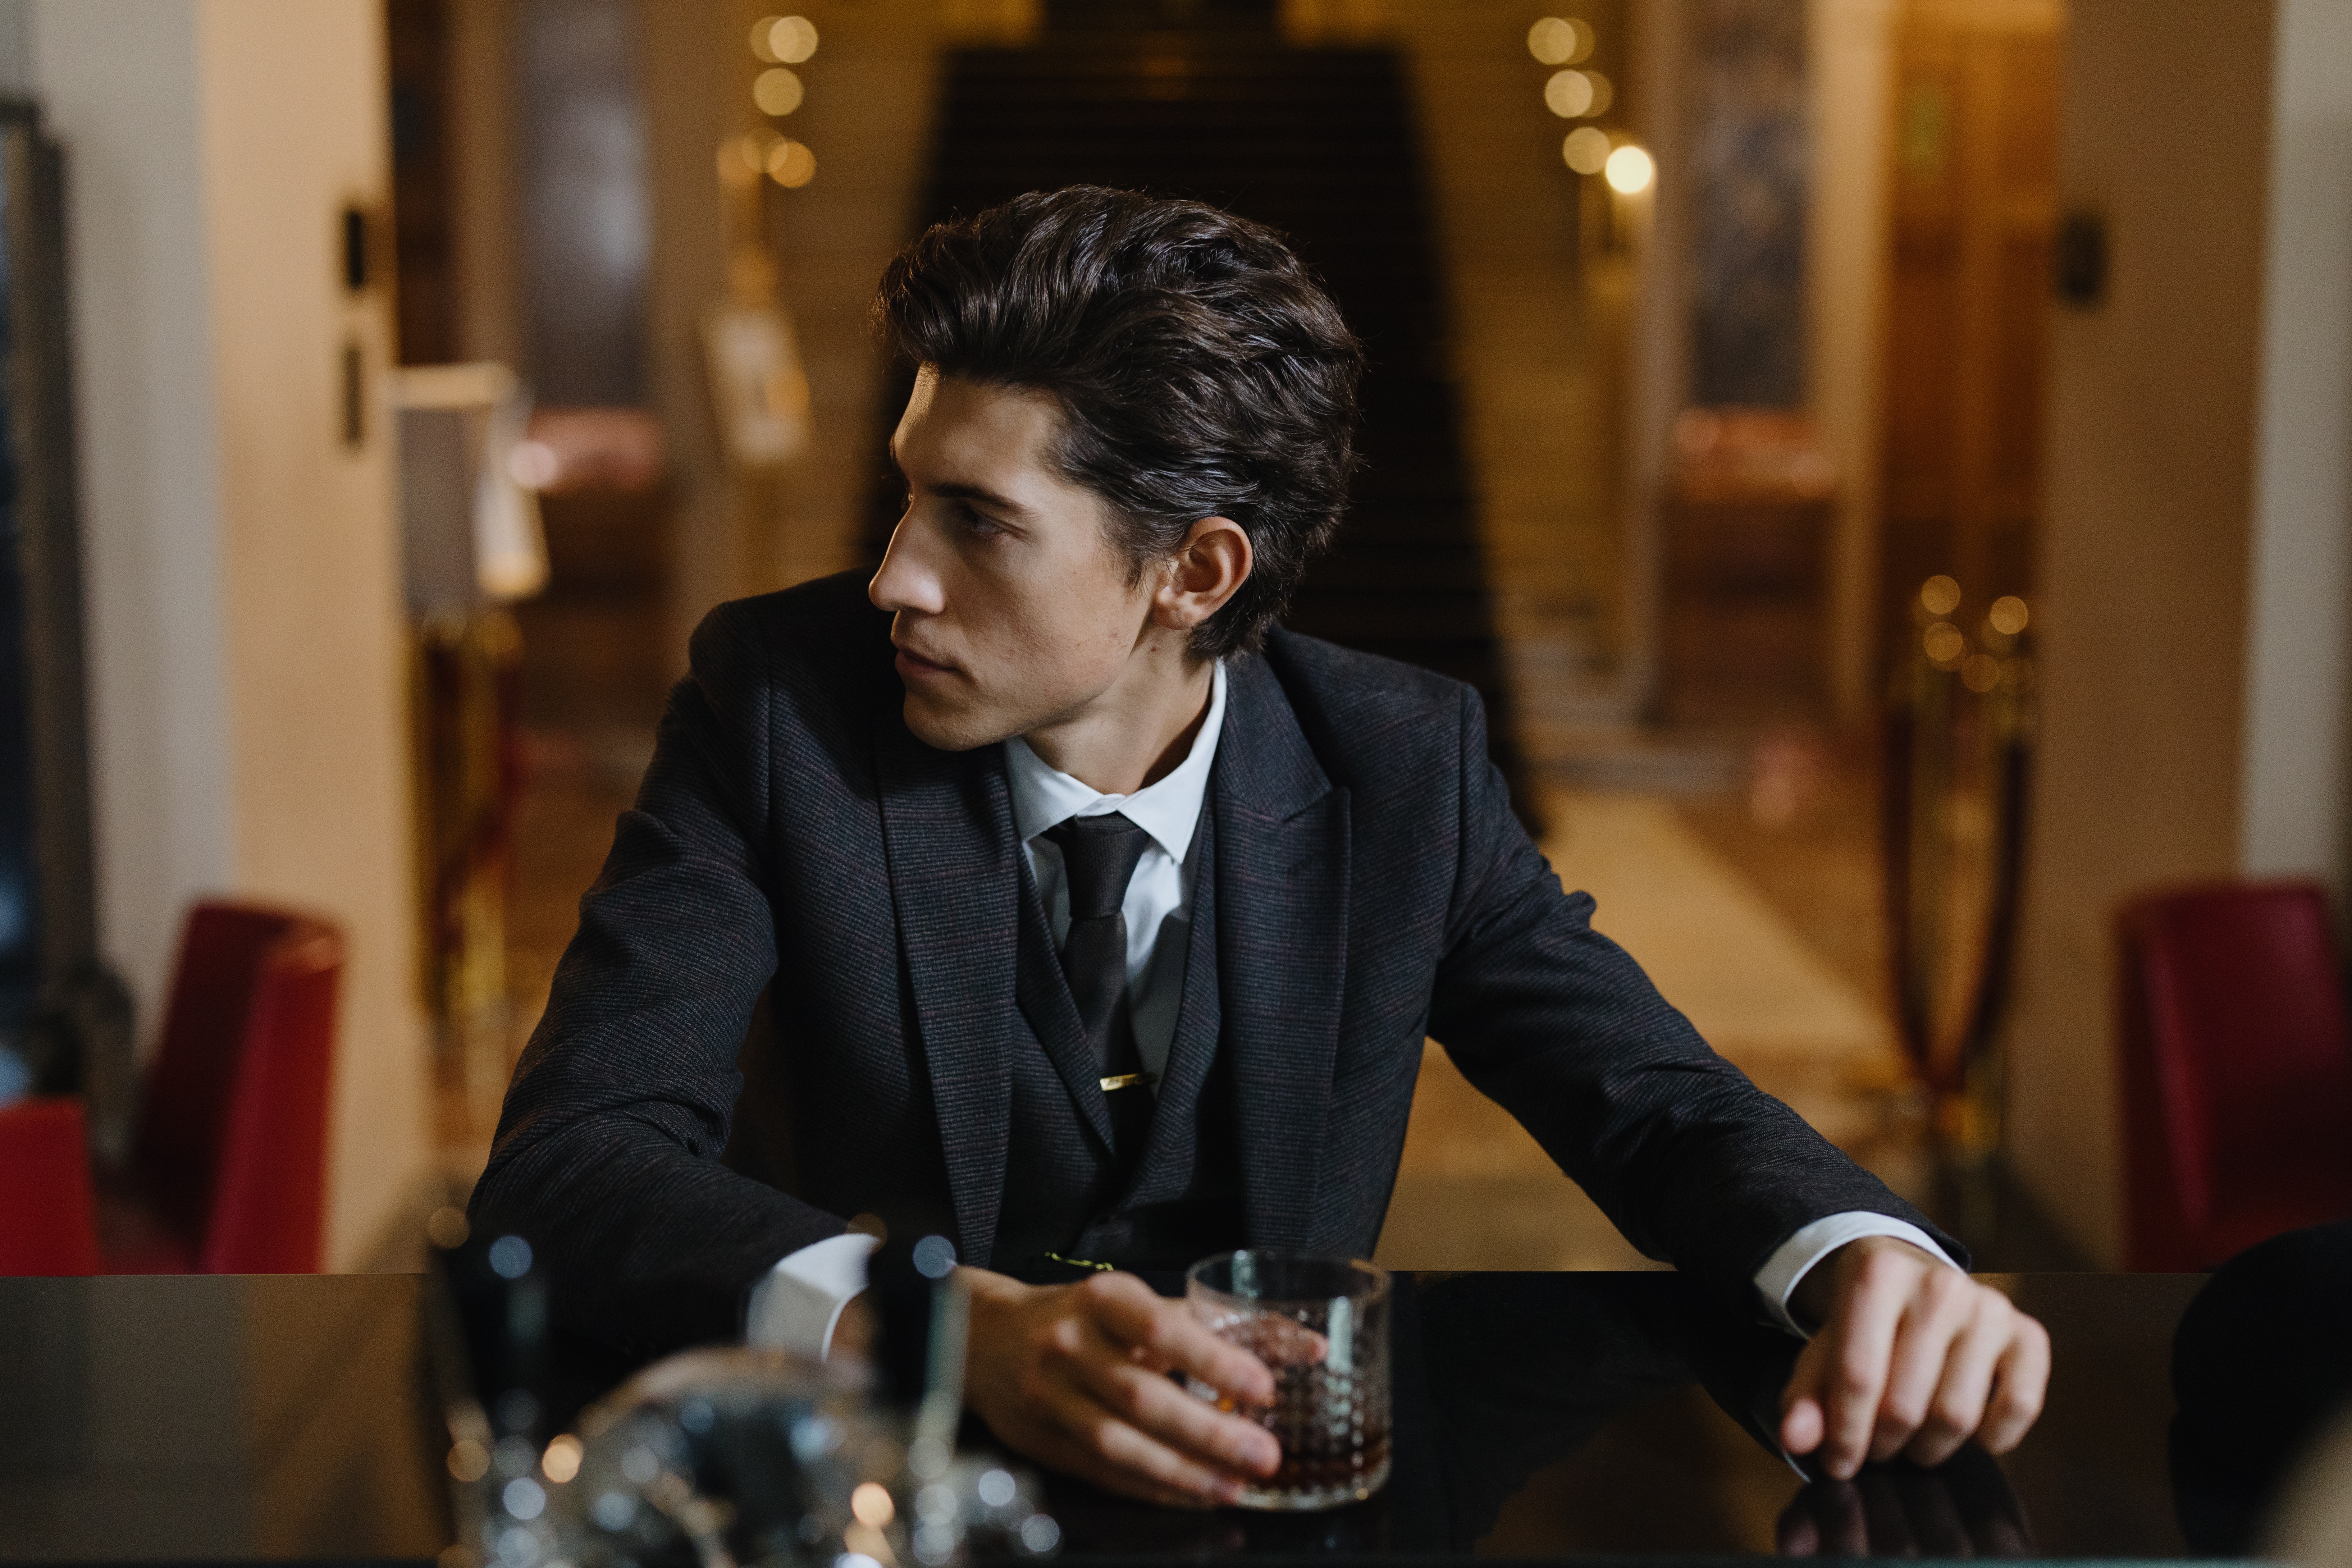 man in suit drinking and thinking